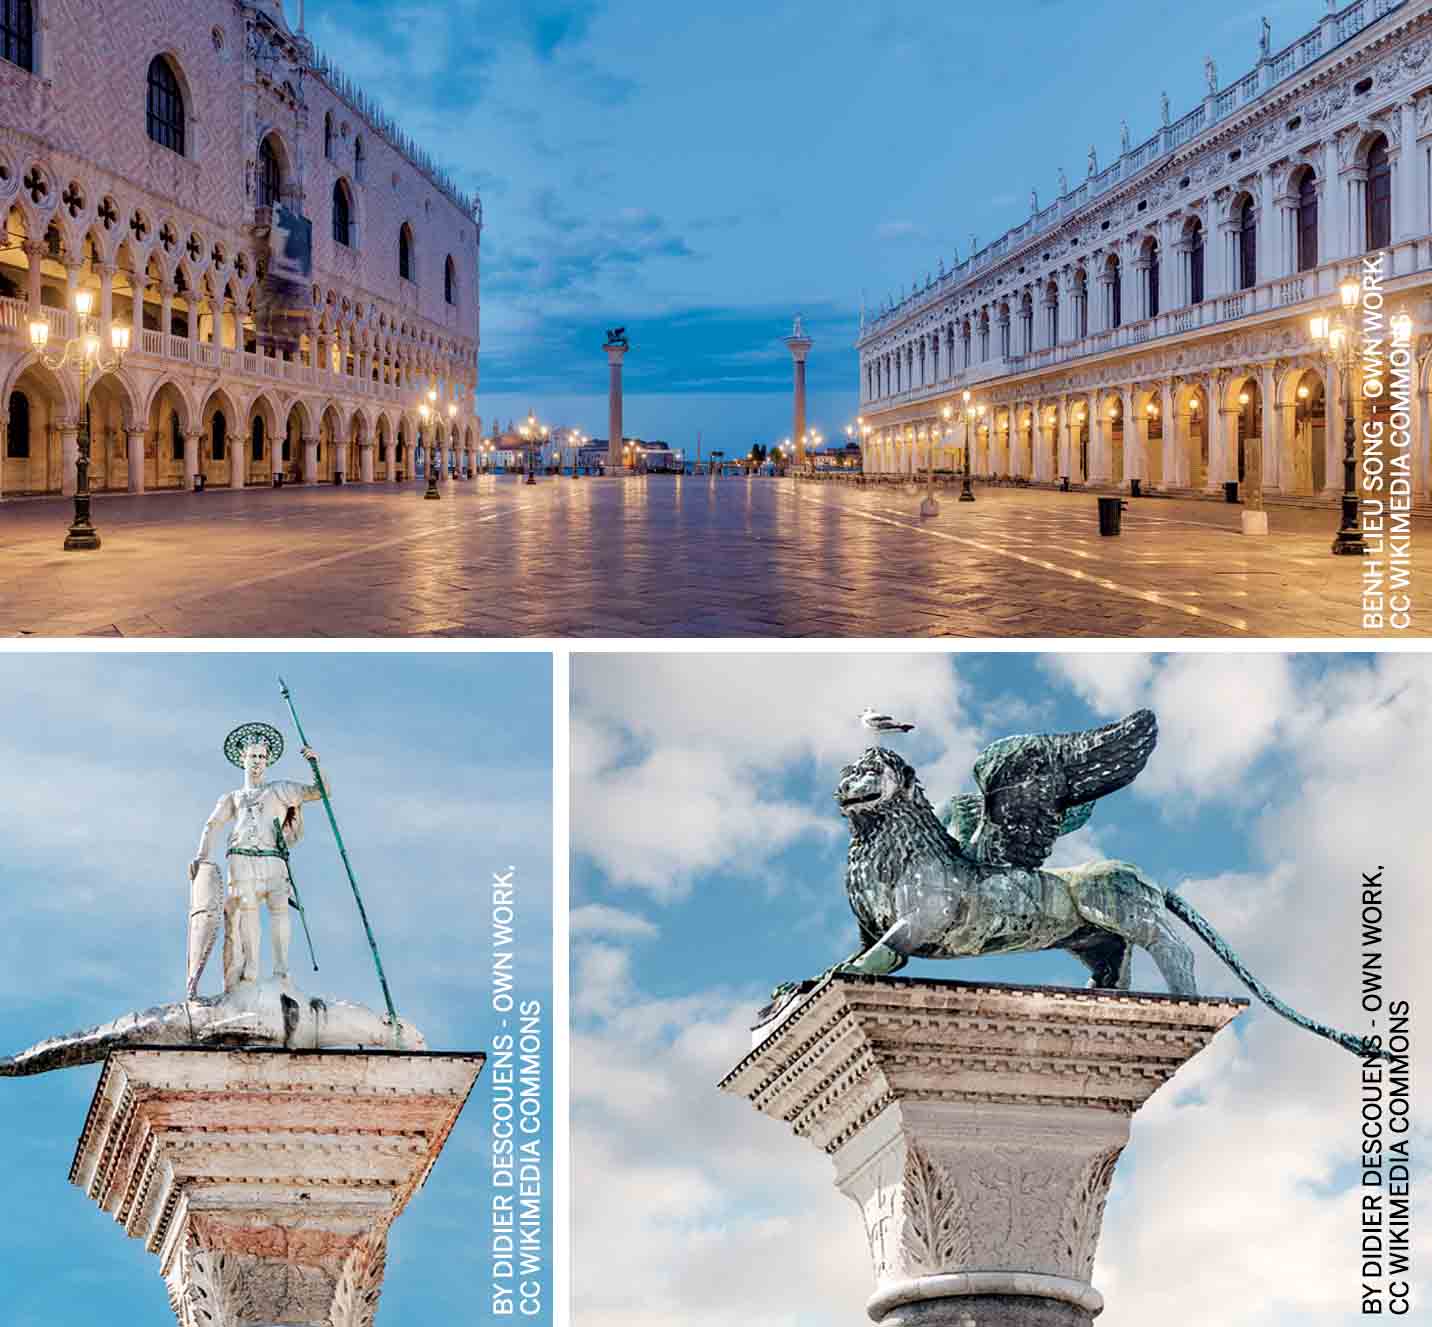 sculpting-organised-urban-design-view-piazzetta-san-marco-toward-grand-canal-venice-dawn-doges-palace-left-biblioteca-marciana-right-two-columns-saint-marks-protector-city-theodores-western-lion-venice-piazzetta